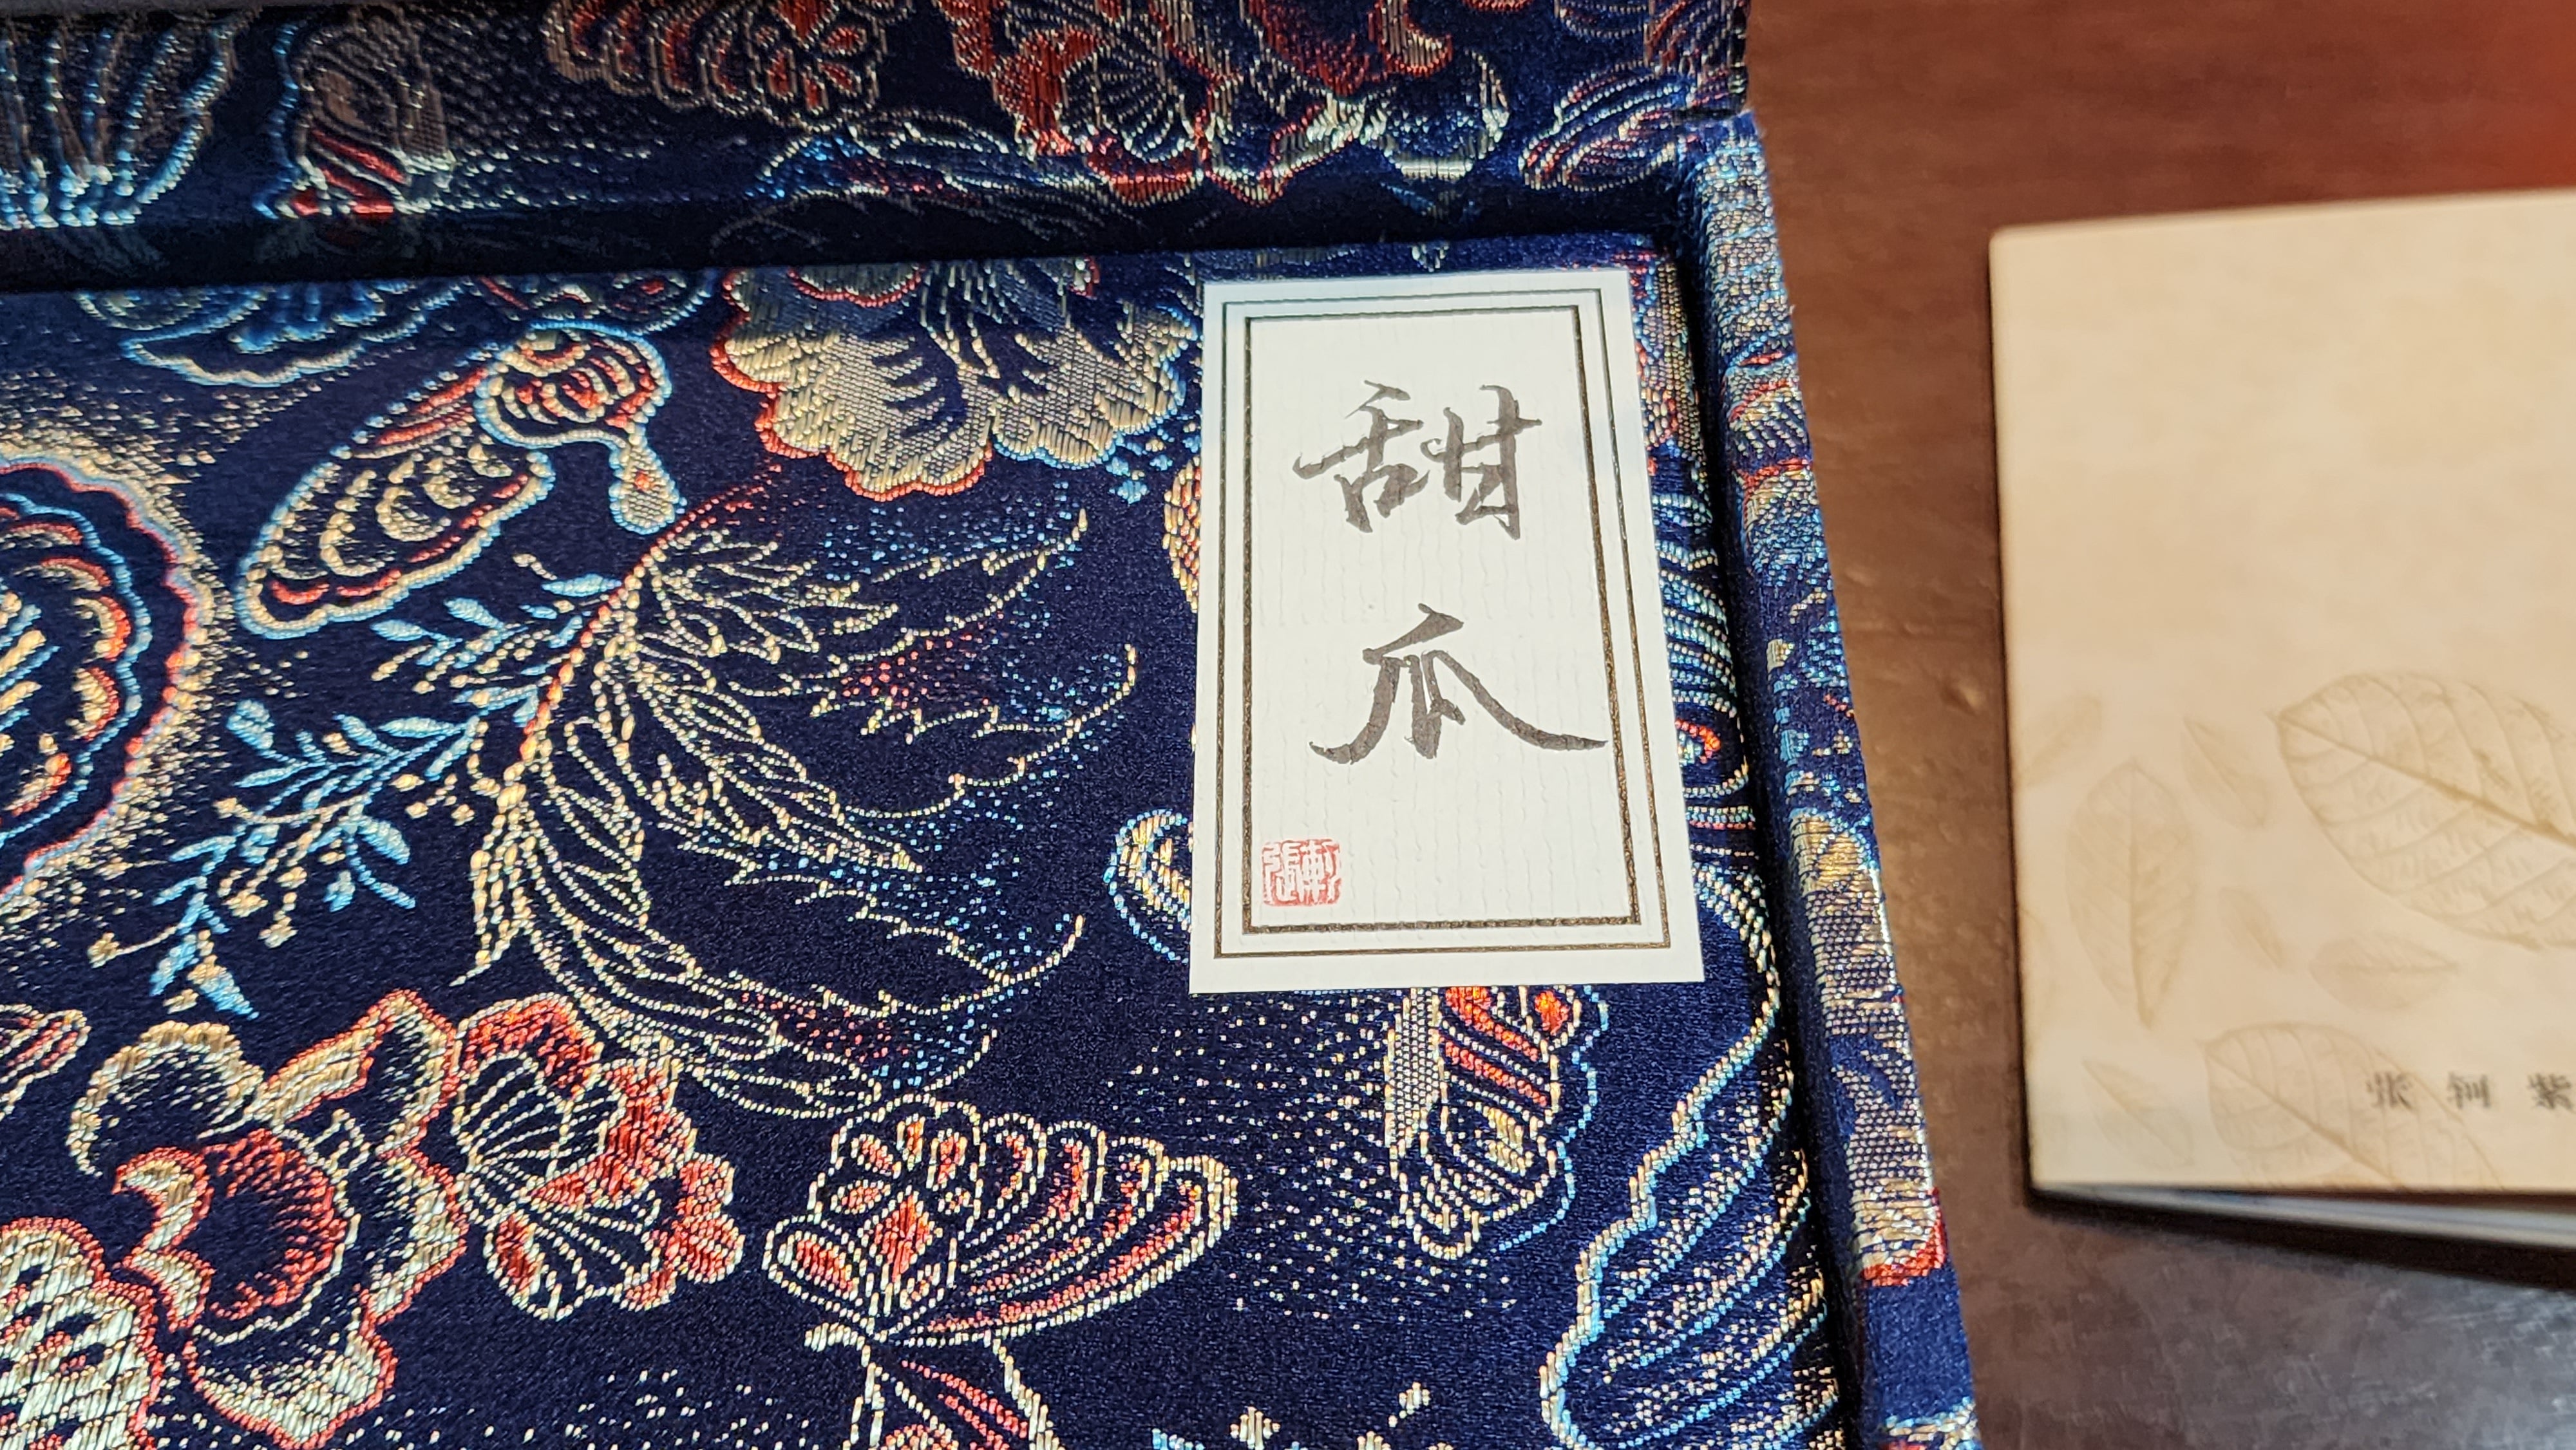 Tian Gua work 甜瓜壶 : Cao Family's meticulously composed : Ming Guo Lü Ni 明国绿泥 made with Cao's Family 100% BenShan LüNi 本山绿泥 + German Cobalt 德国钴, made by L4 Assoc Master Artist Zhang Ke 助理工艺美术师, 张轲。- bespoke commissioned in Feb 2023 for our French patron.